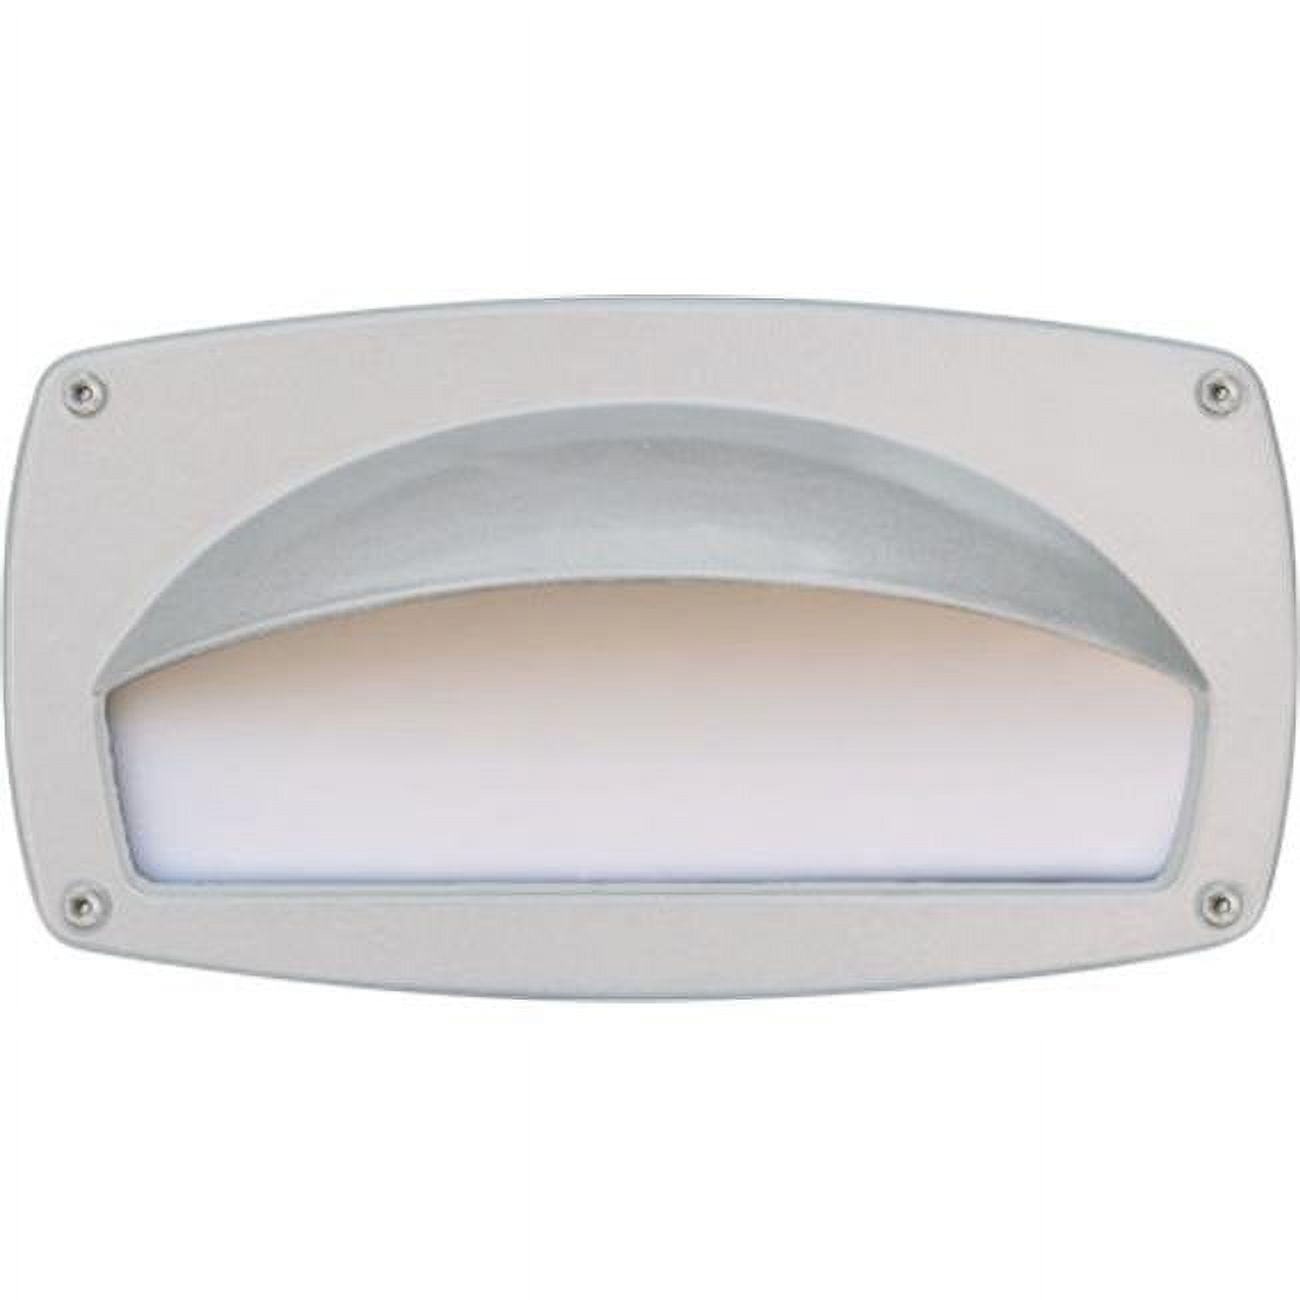 Picture of Dabmar Lighting DSL1014-W Recessed Hooded Brick, Step & Wall Light, White - 4.95 x 9 x 3.80 in.